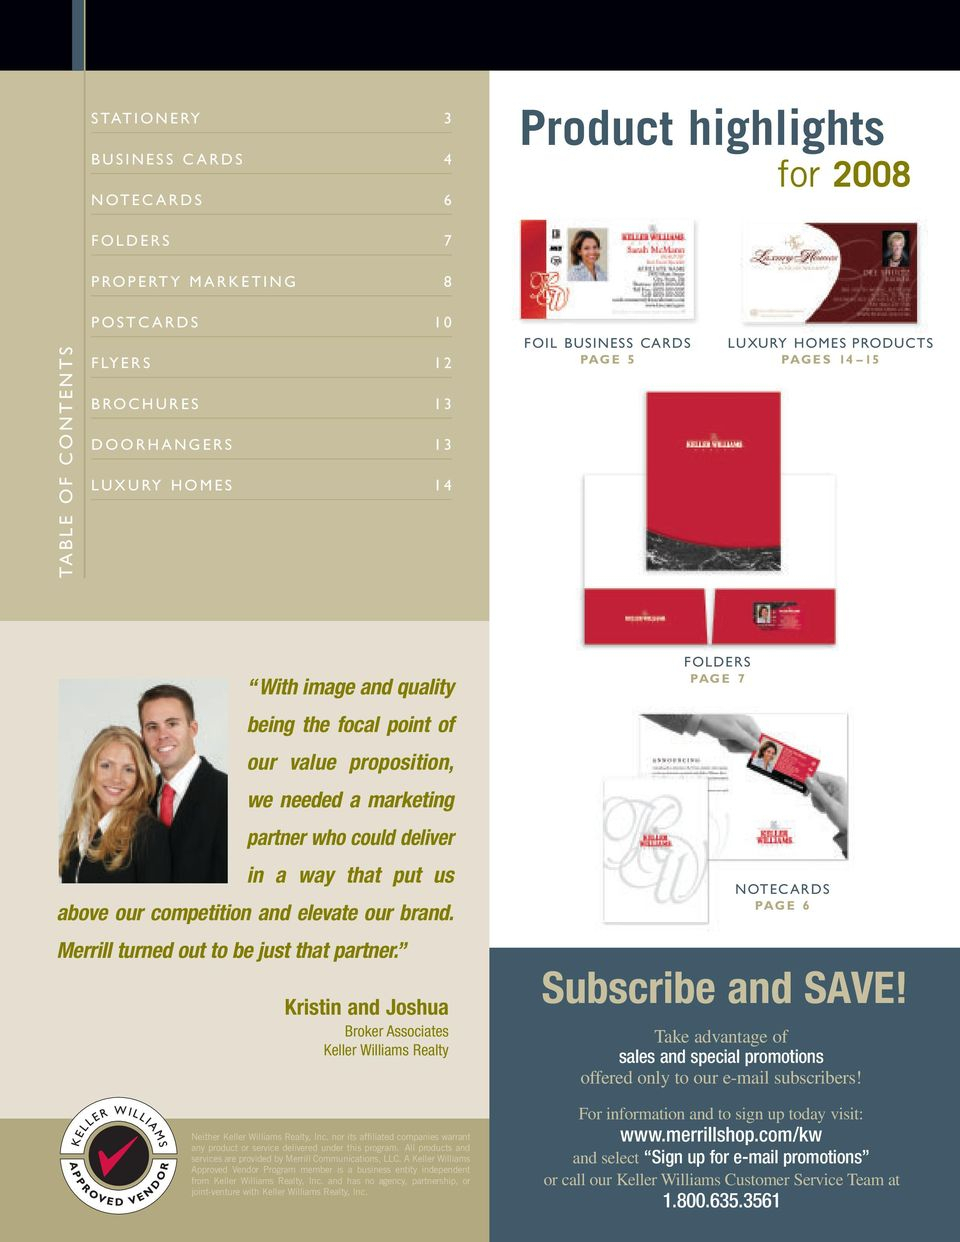 The Professional Look Of Keller Williams Realty Personalized Within Keller Williams Letterhead Templates